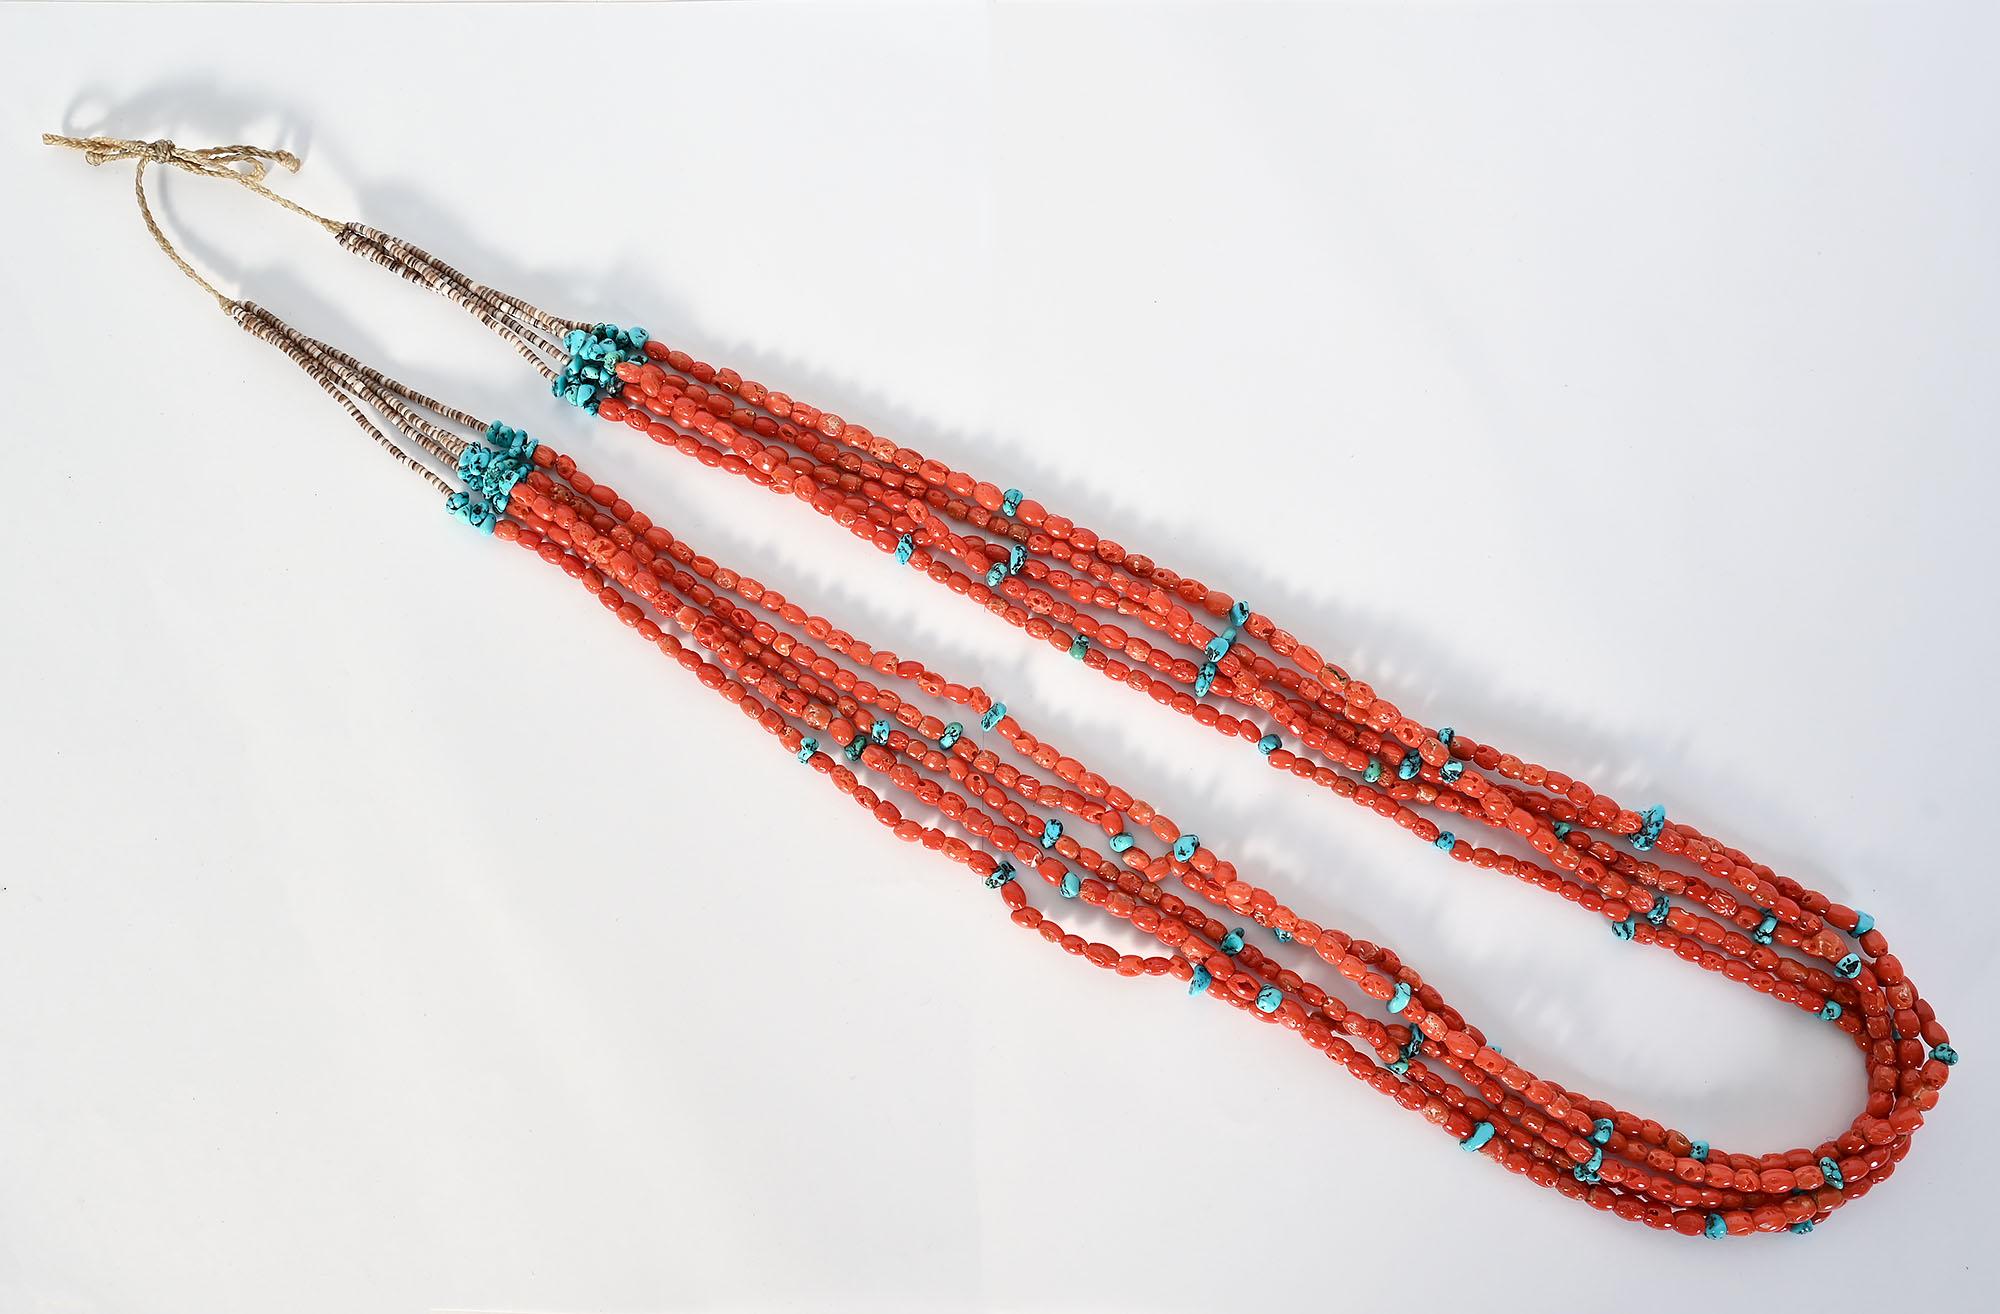 Five strand Native  American (probably Navajo) coral necklace interspersed with turquoise. The coral consists of oval shaped beads and the turquoise beads are irregular in shape. The necklace is 33 1/2 inches long. The 2 1/2 inches closest to the